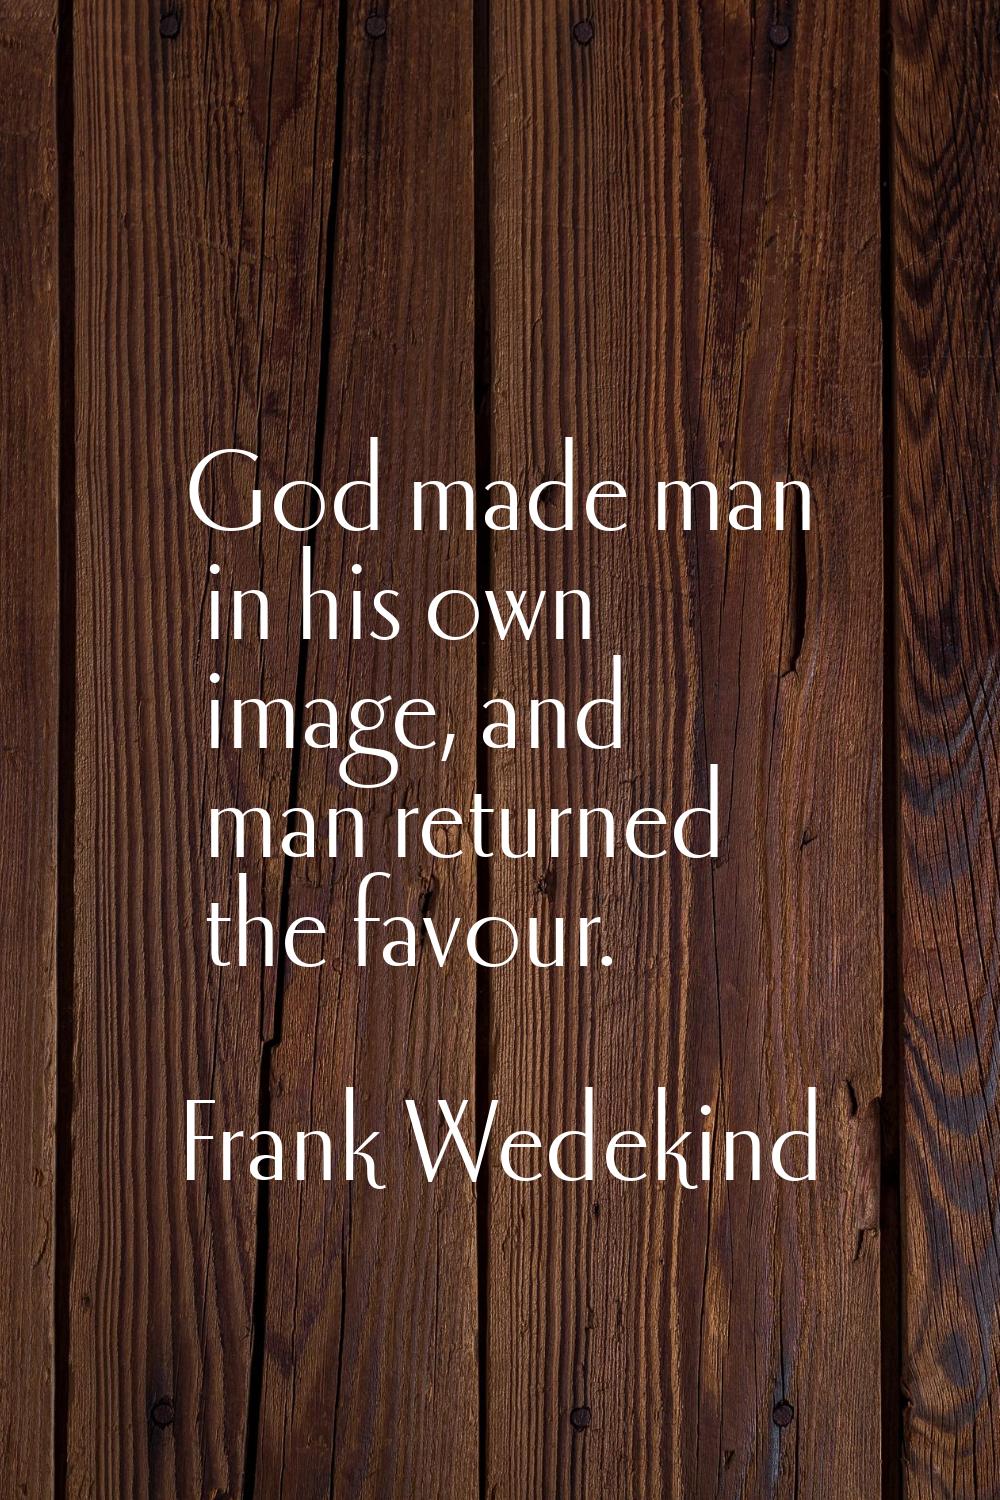 God made man in his own image, and man returned the favour.